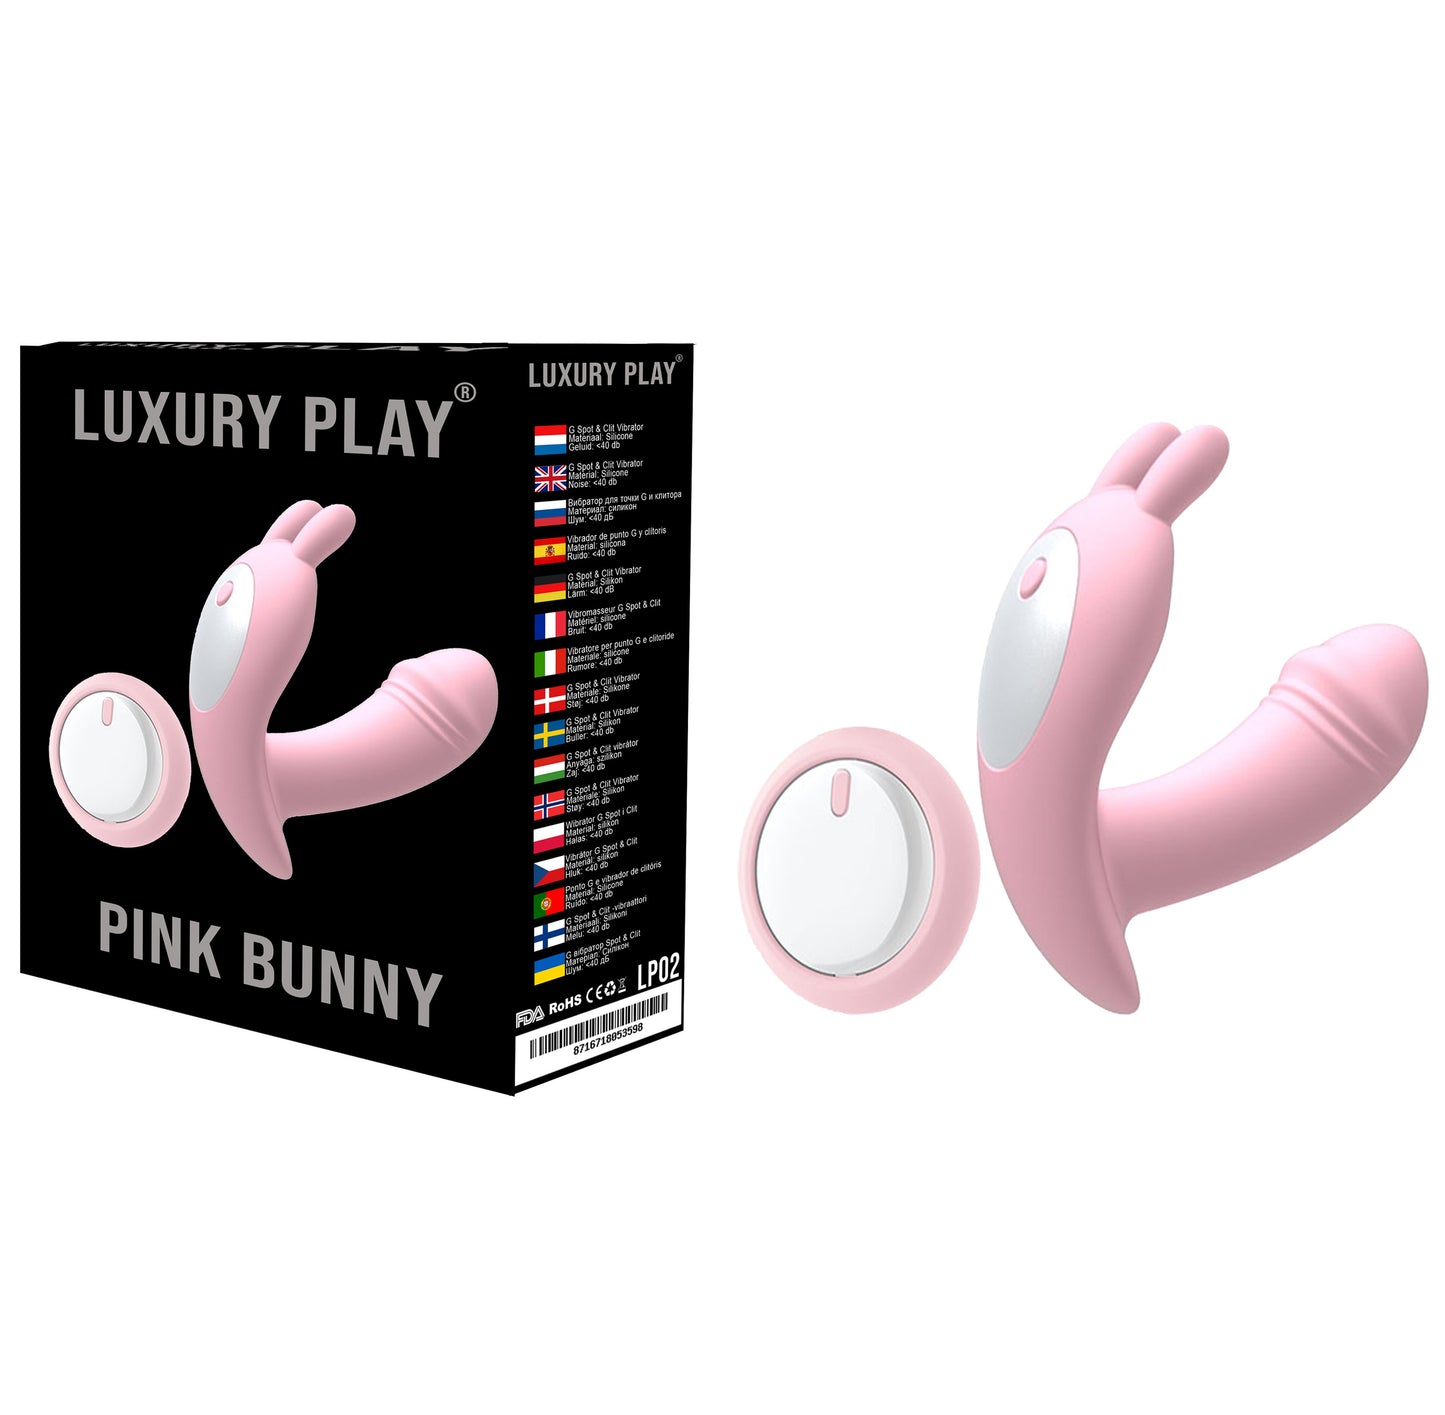 Luxury Play - LP02 - Panty Vibrator - 10 Speed - easy remote control - Rechargeable - Sexy G spot & Clit Vibrator - Trendy Pink - Silicone - low noise less than 40 db - Luxury Colourbox